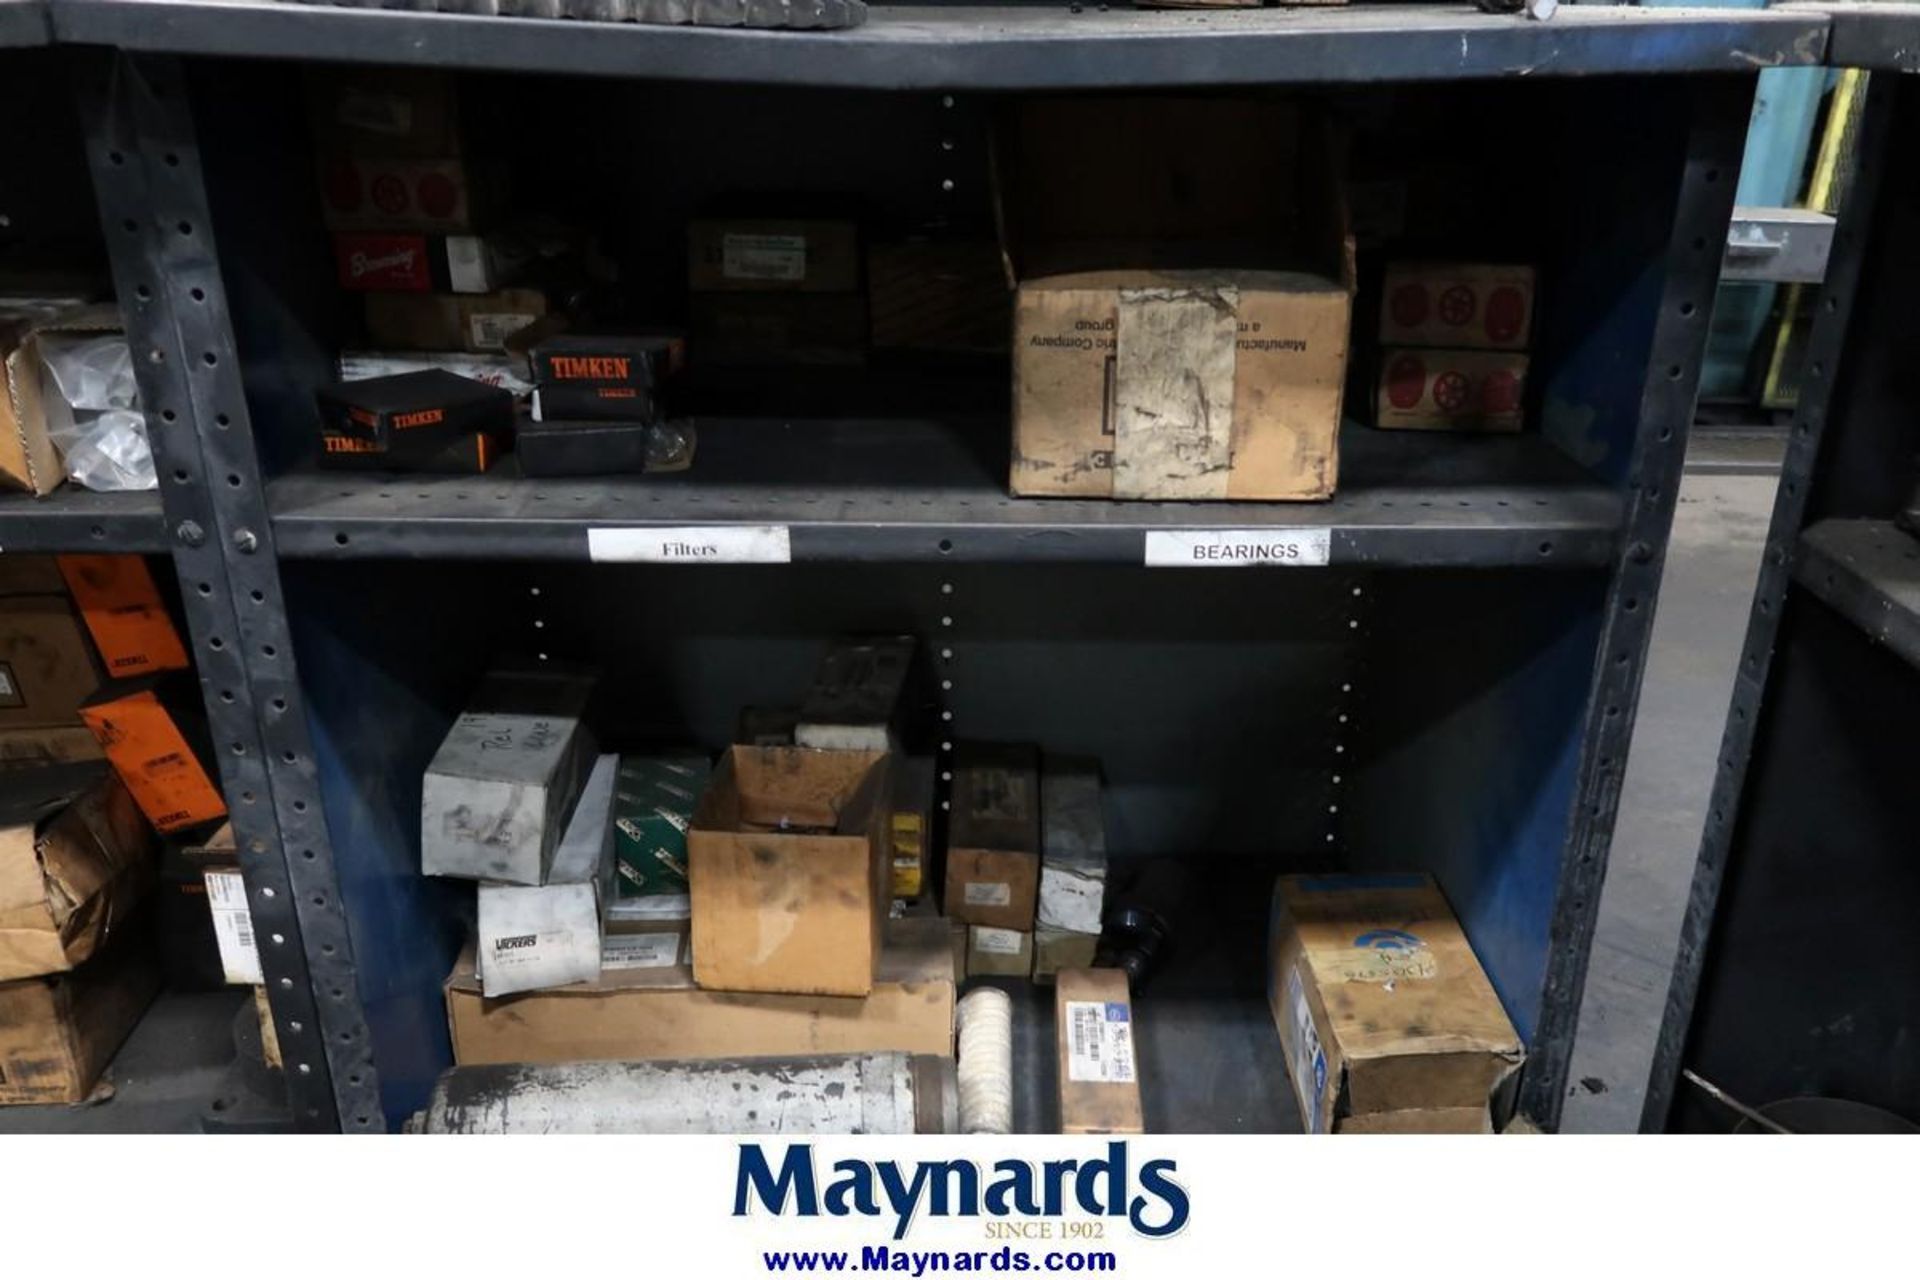 Adjustable Steel Shelving Units with Contents of Heat Treat Spare Parts - Image 12 of 16